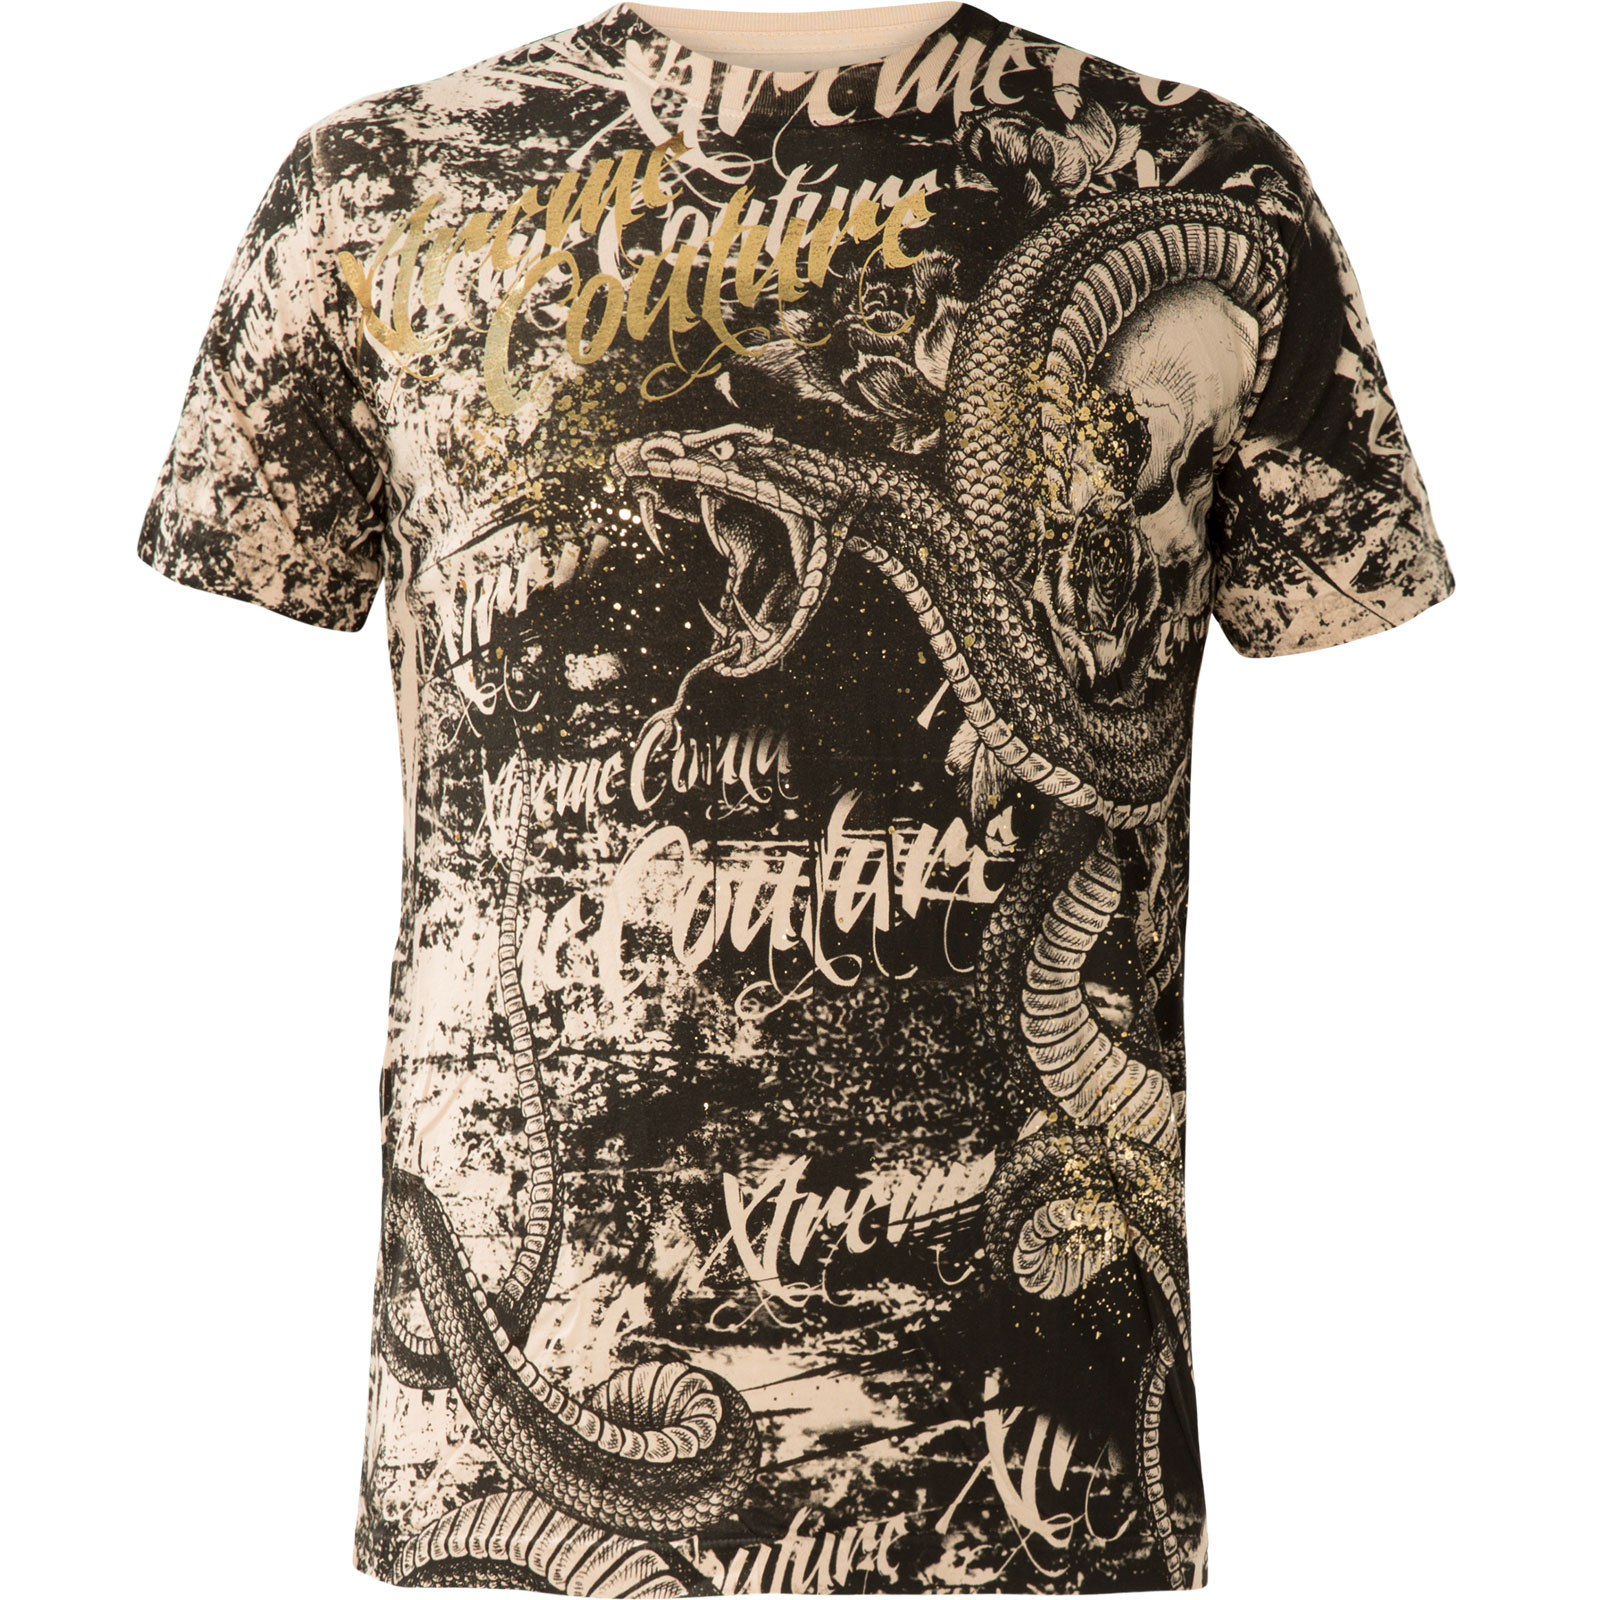 Xtreme Couture T- Shirt Blacktooth Grin with a snake and skull